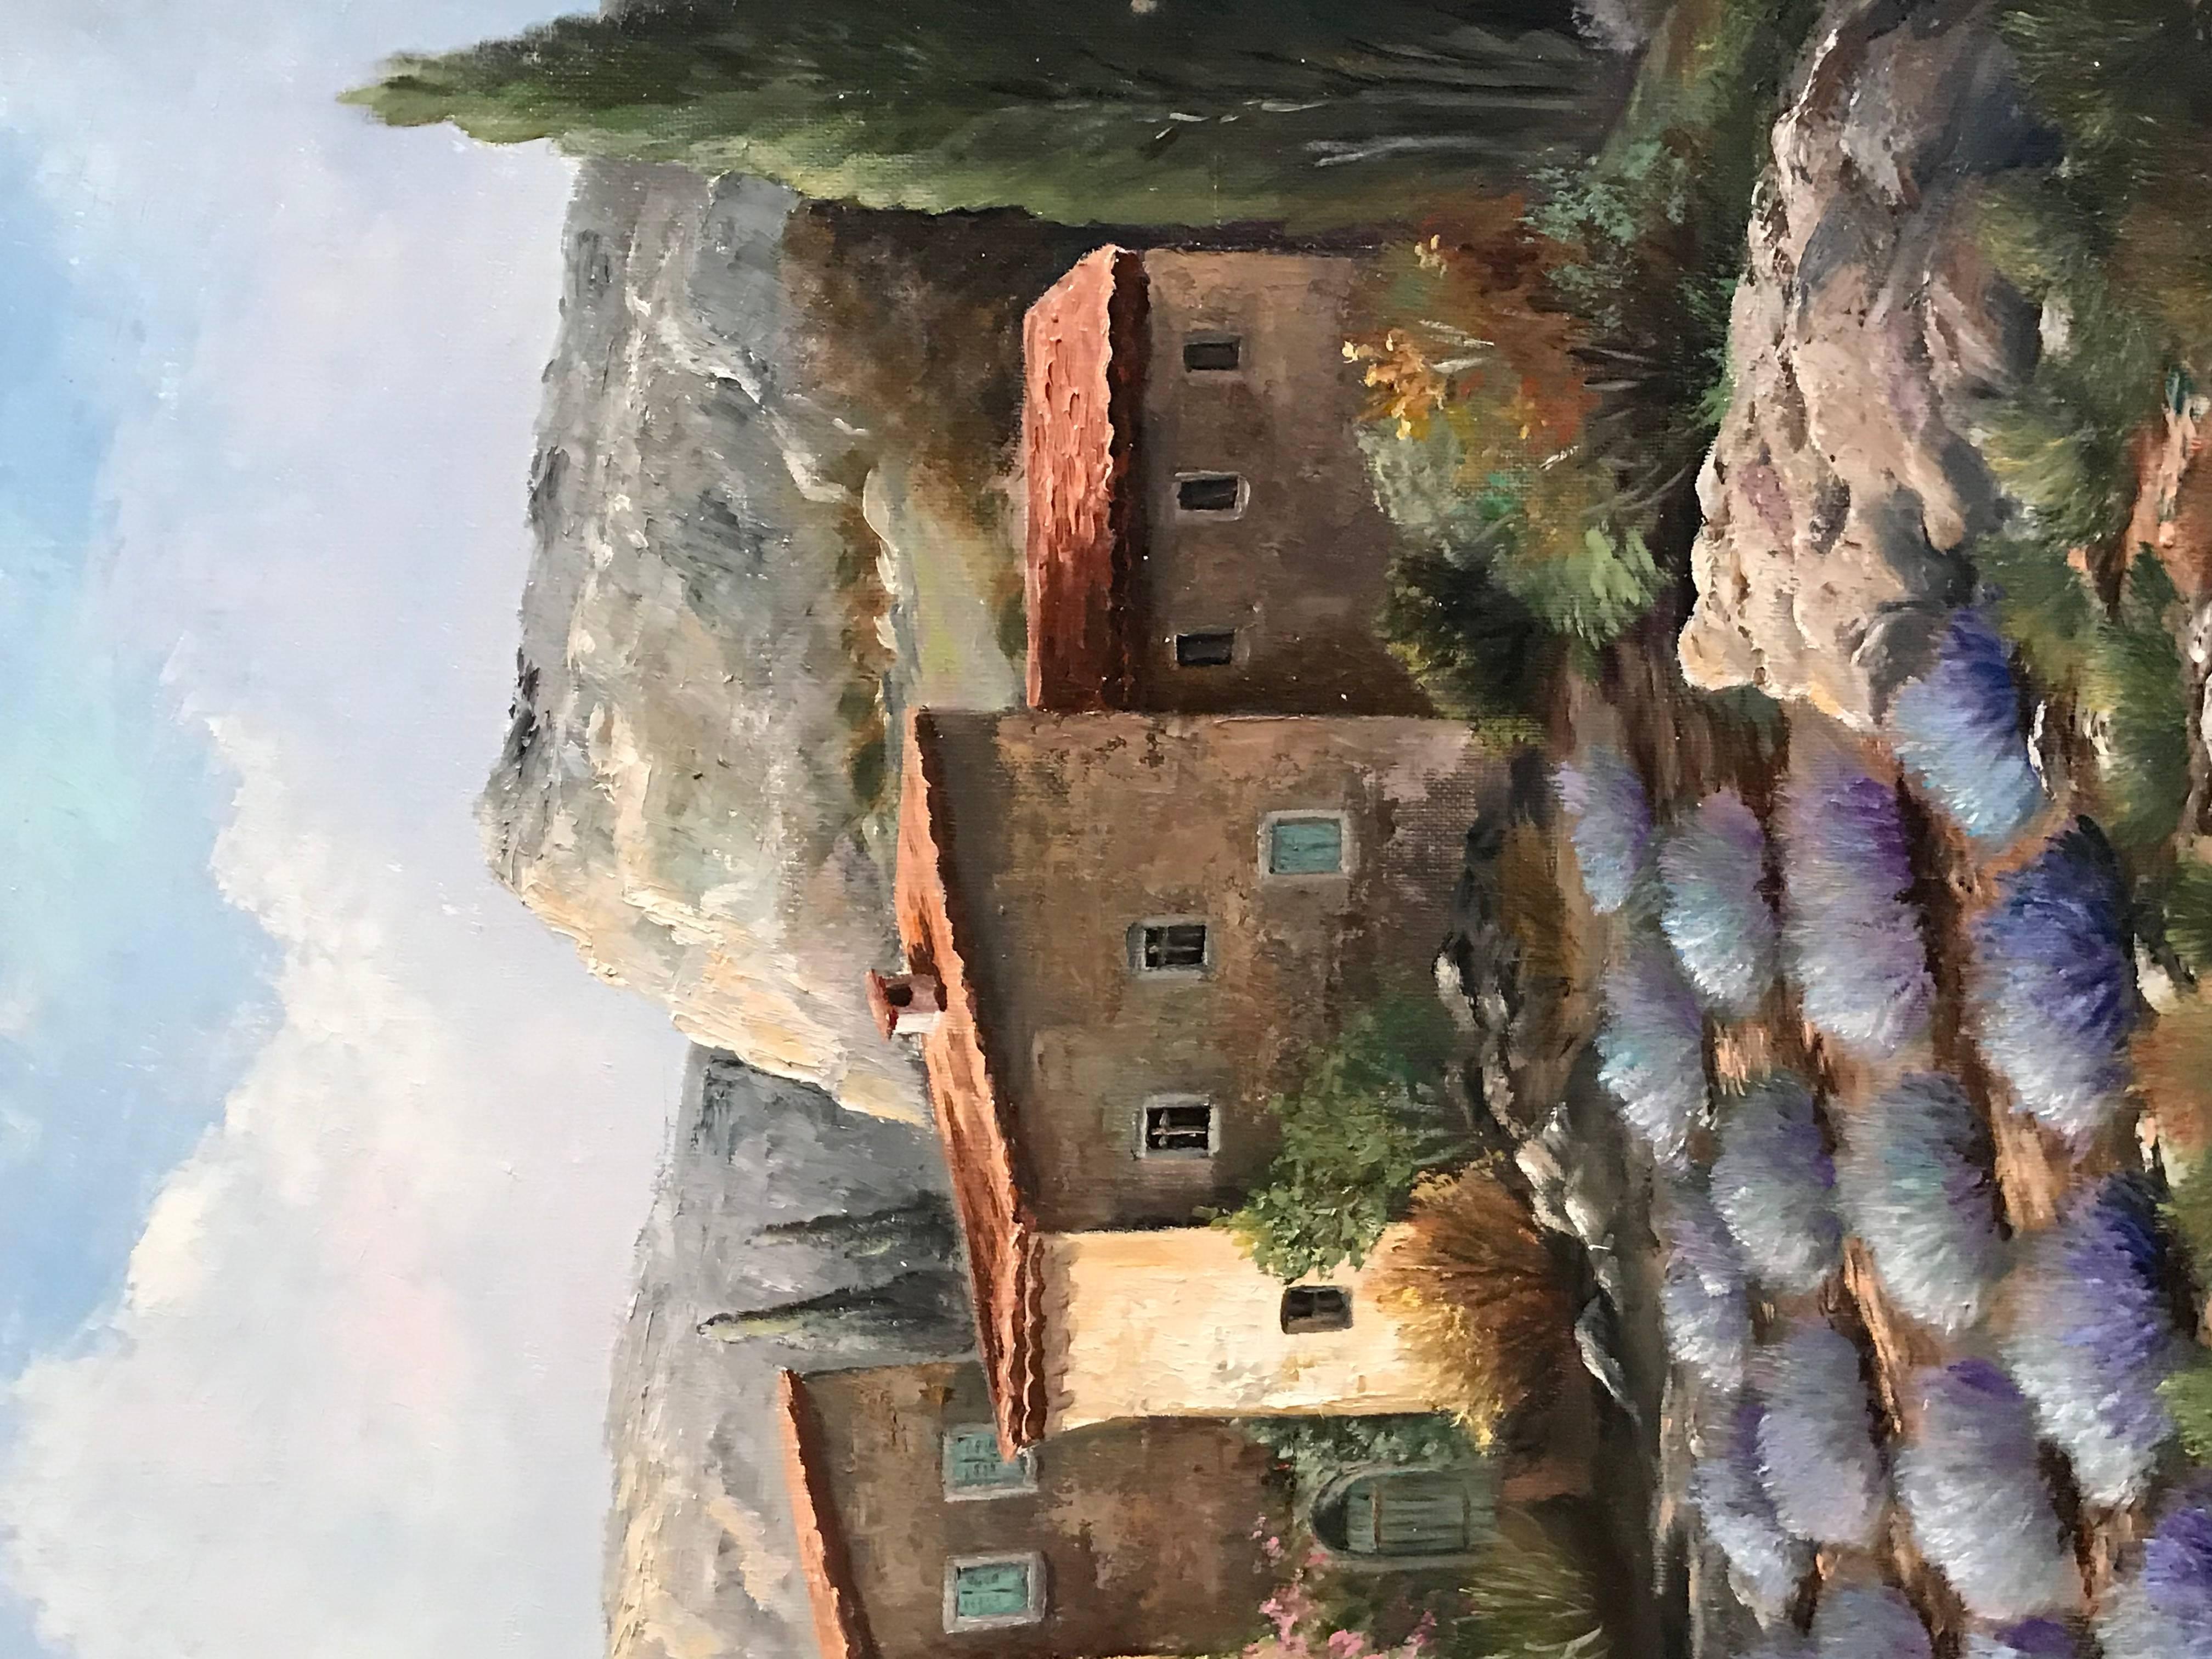 The Lavender Field
French School, 20th century
oil painting on canvas, framed

framed size: 24.5 x 28.5 inches

Lovely French oil painting on canvas depicting lavender growing in a Provencal field. The old stone farm house stands to the centre and